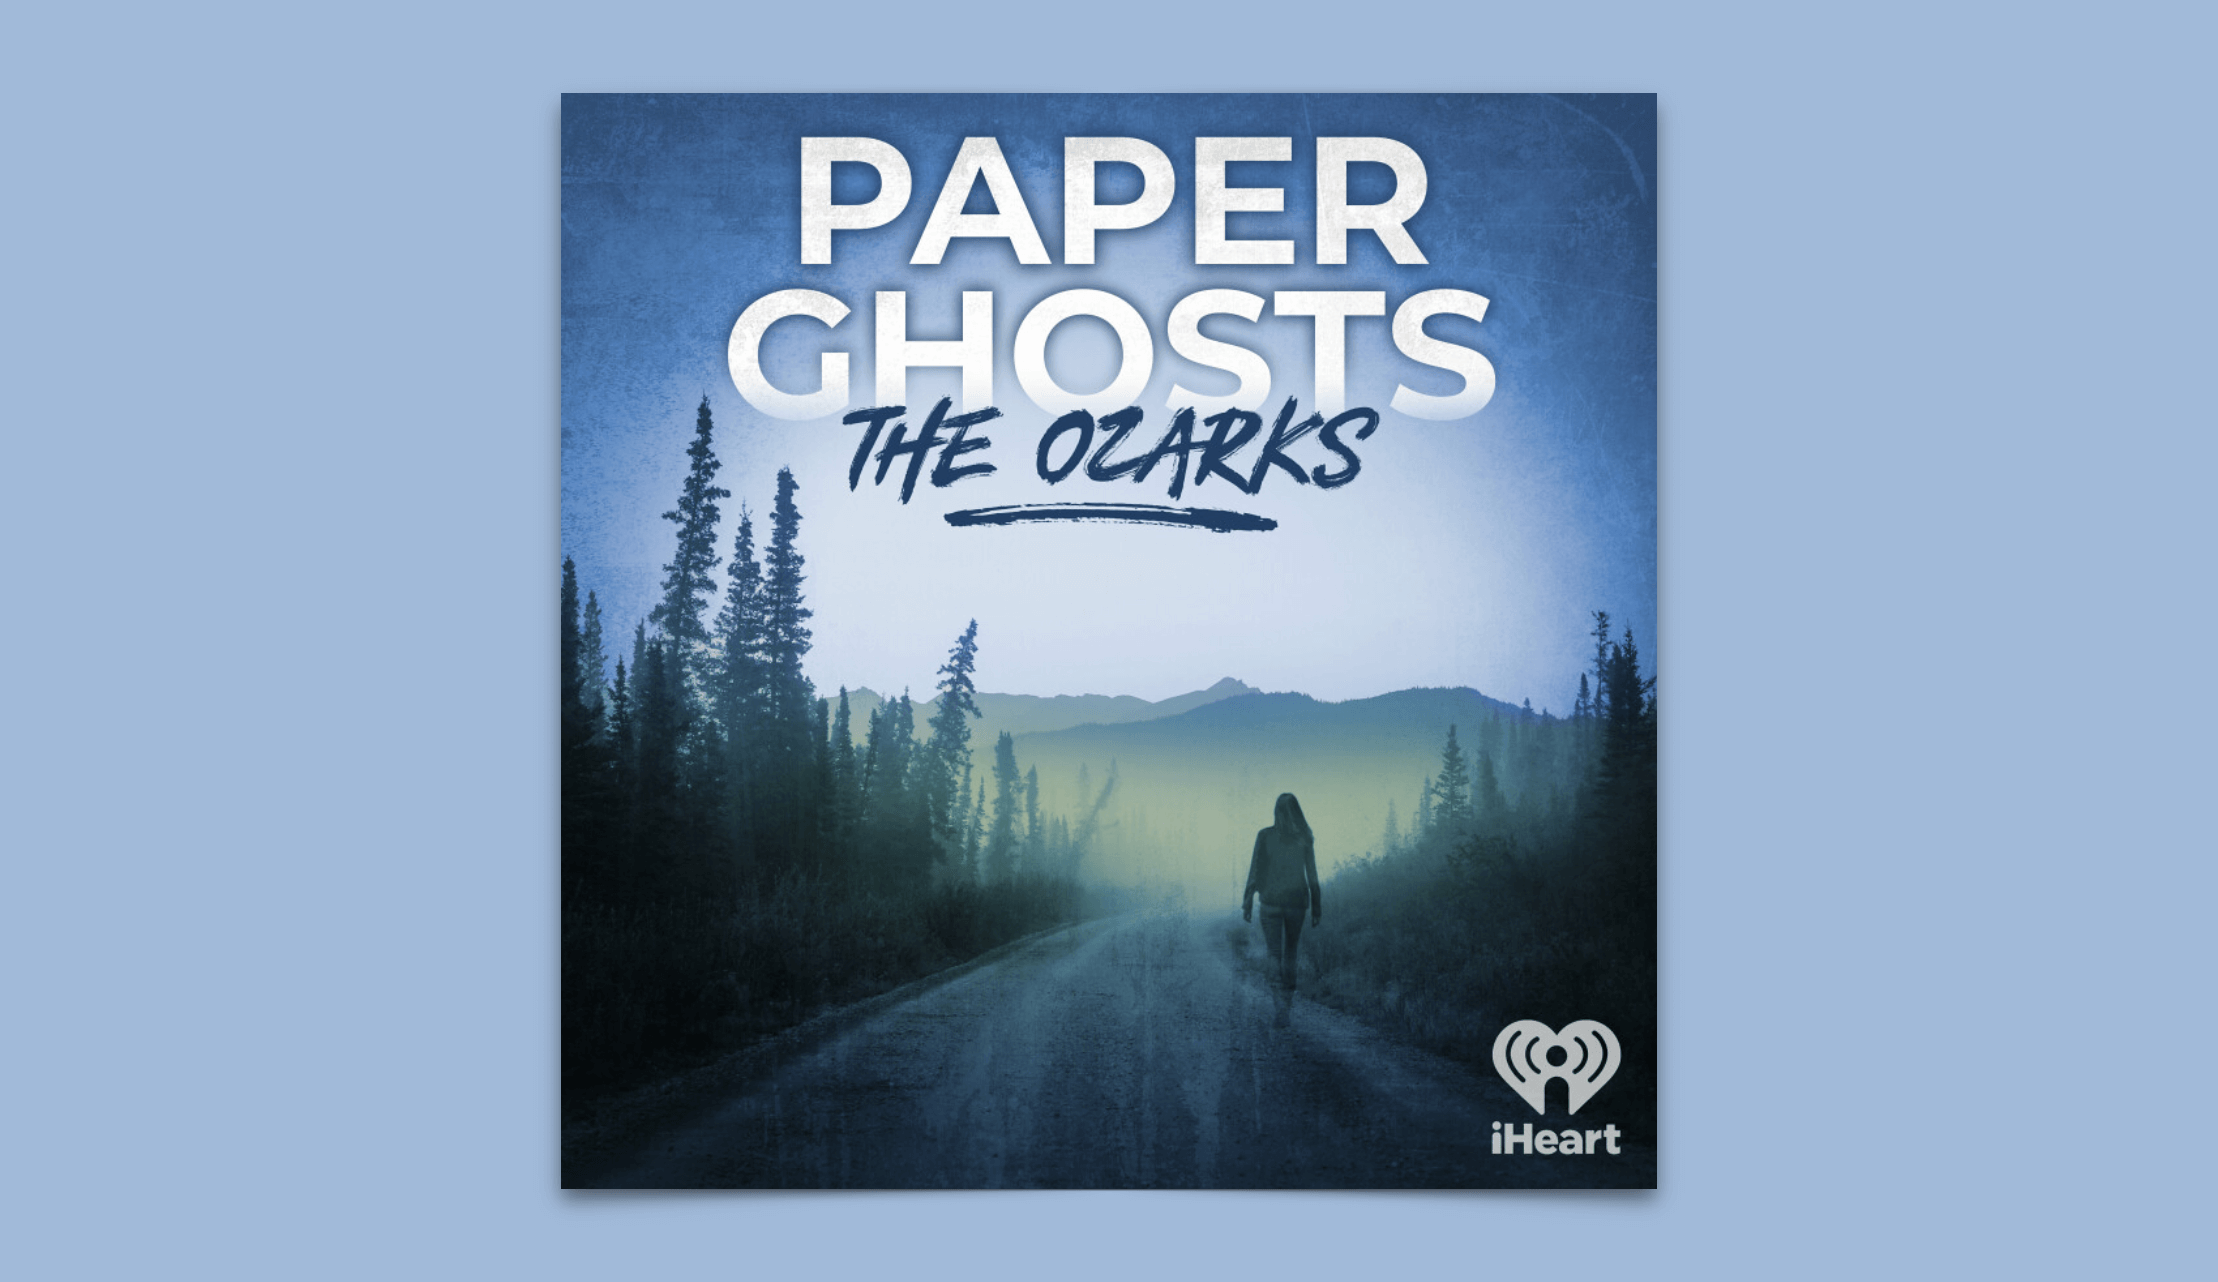 Paper Ghosts The Ozarks Review